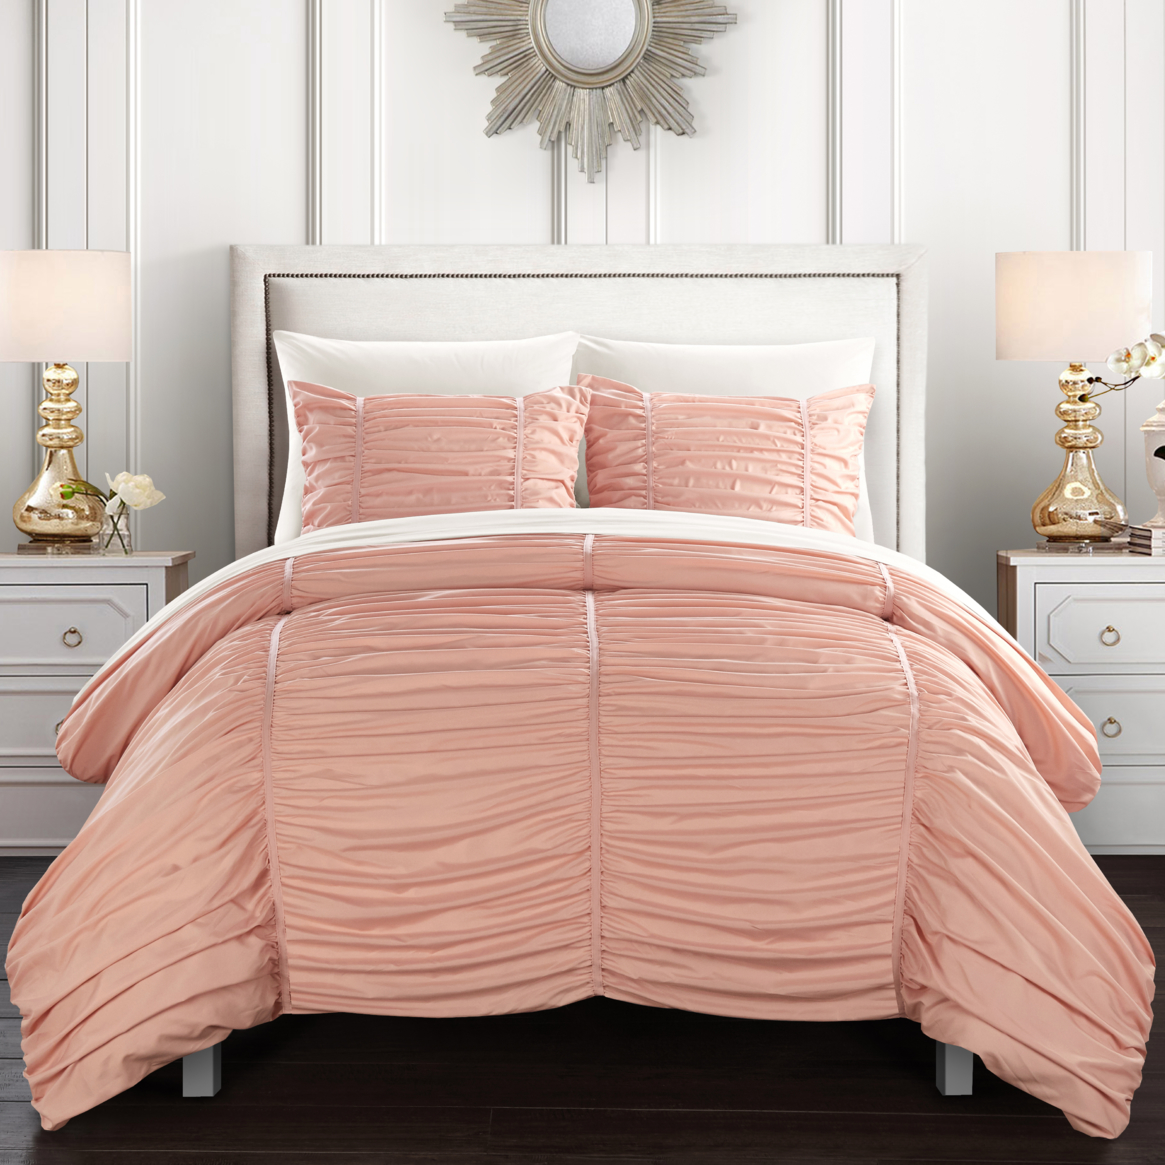 Kleia 7 Or 5 Piece Comforter Set Contemporary Striped Ruched Ruffled Design Bed In A Bag - Coral, Twin